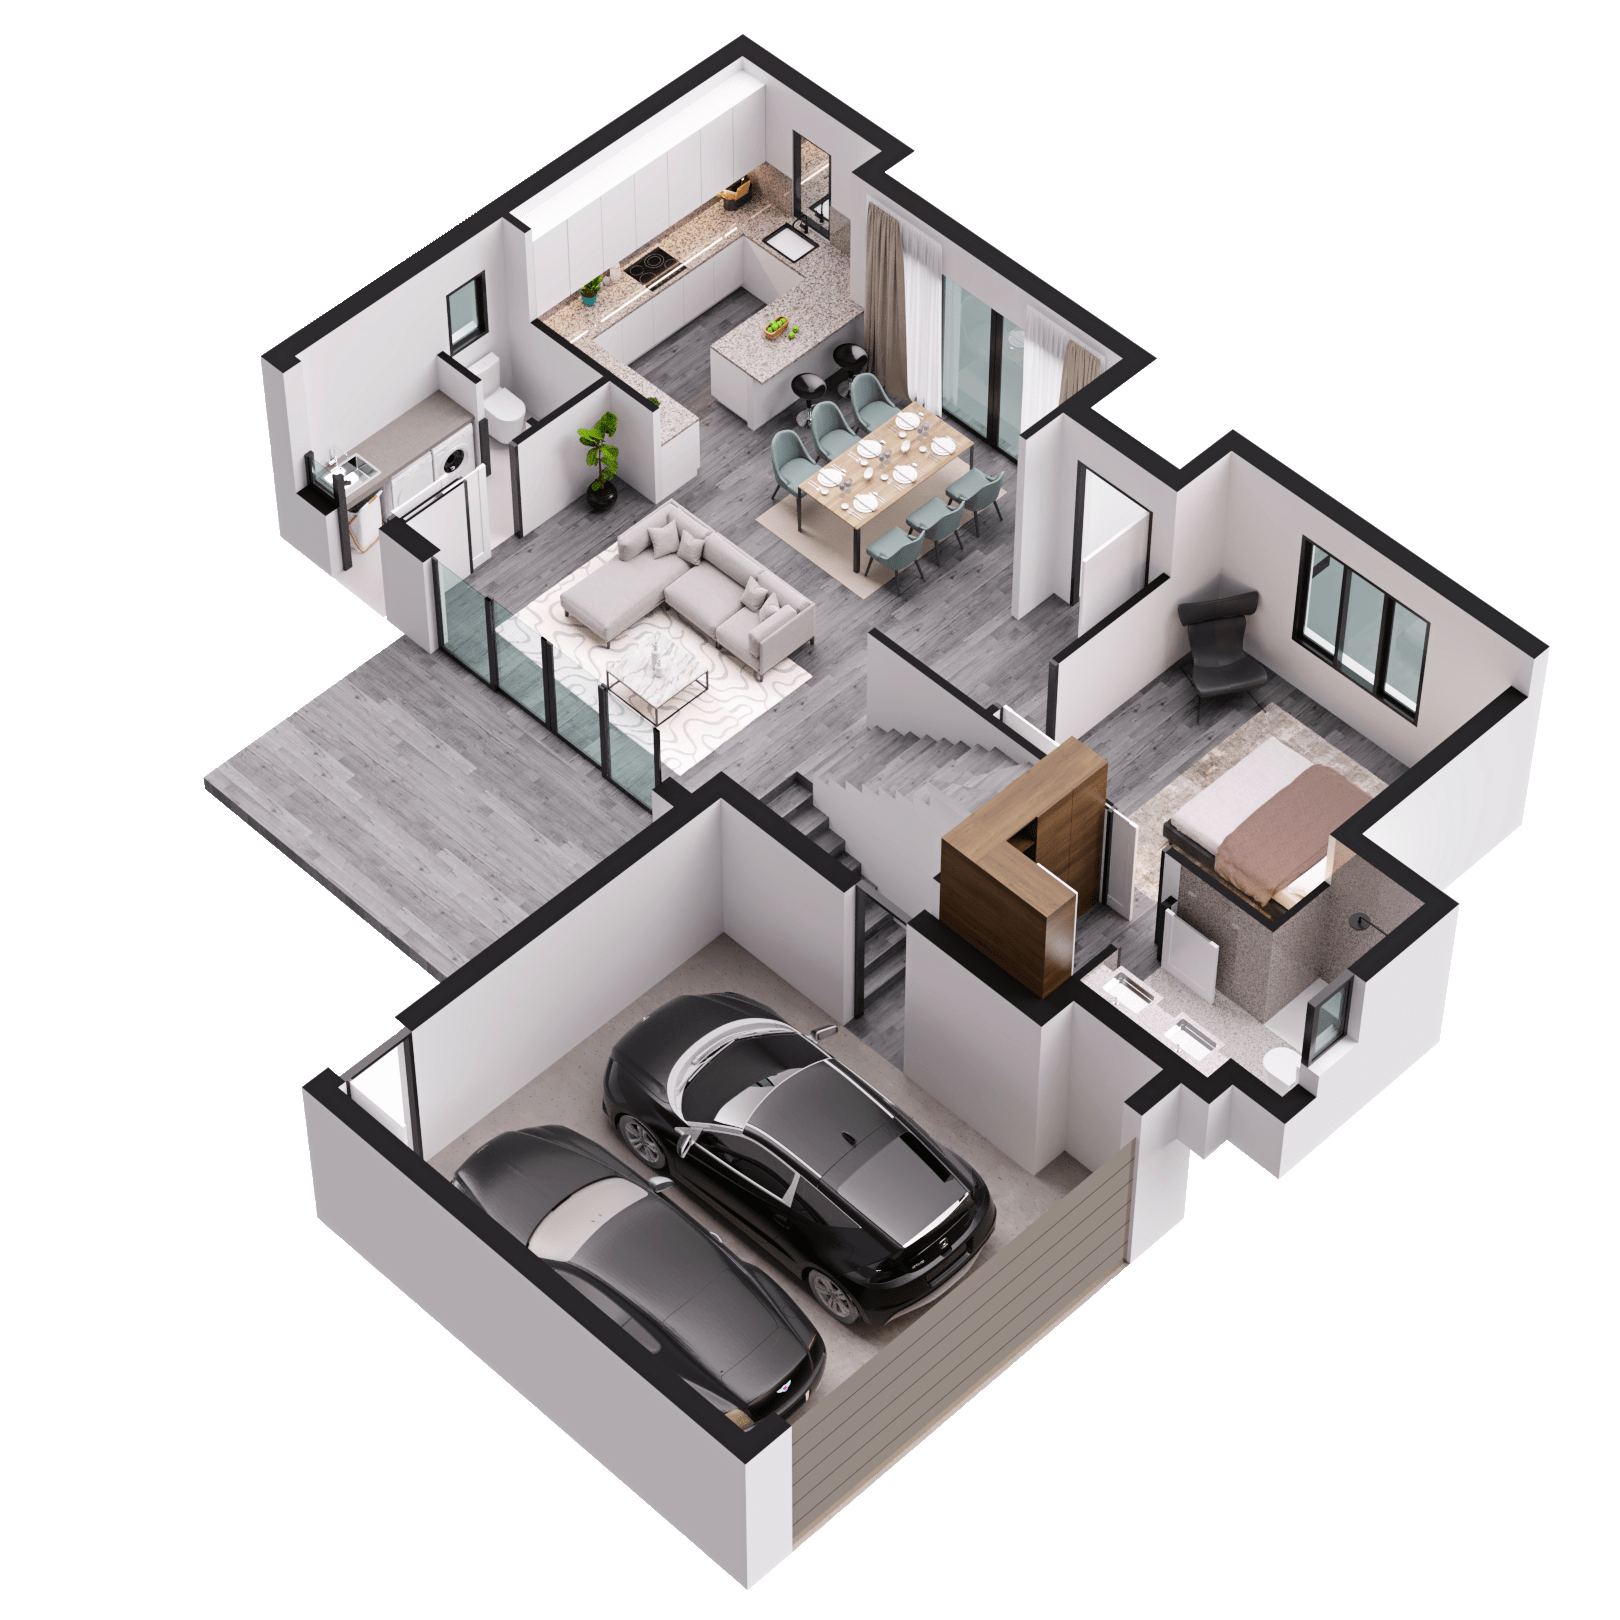 3D floor plans with dimensions